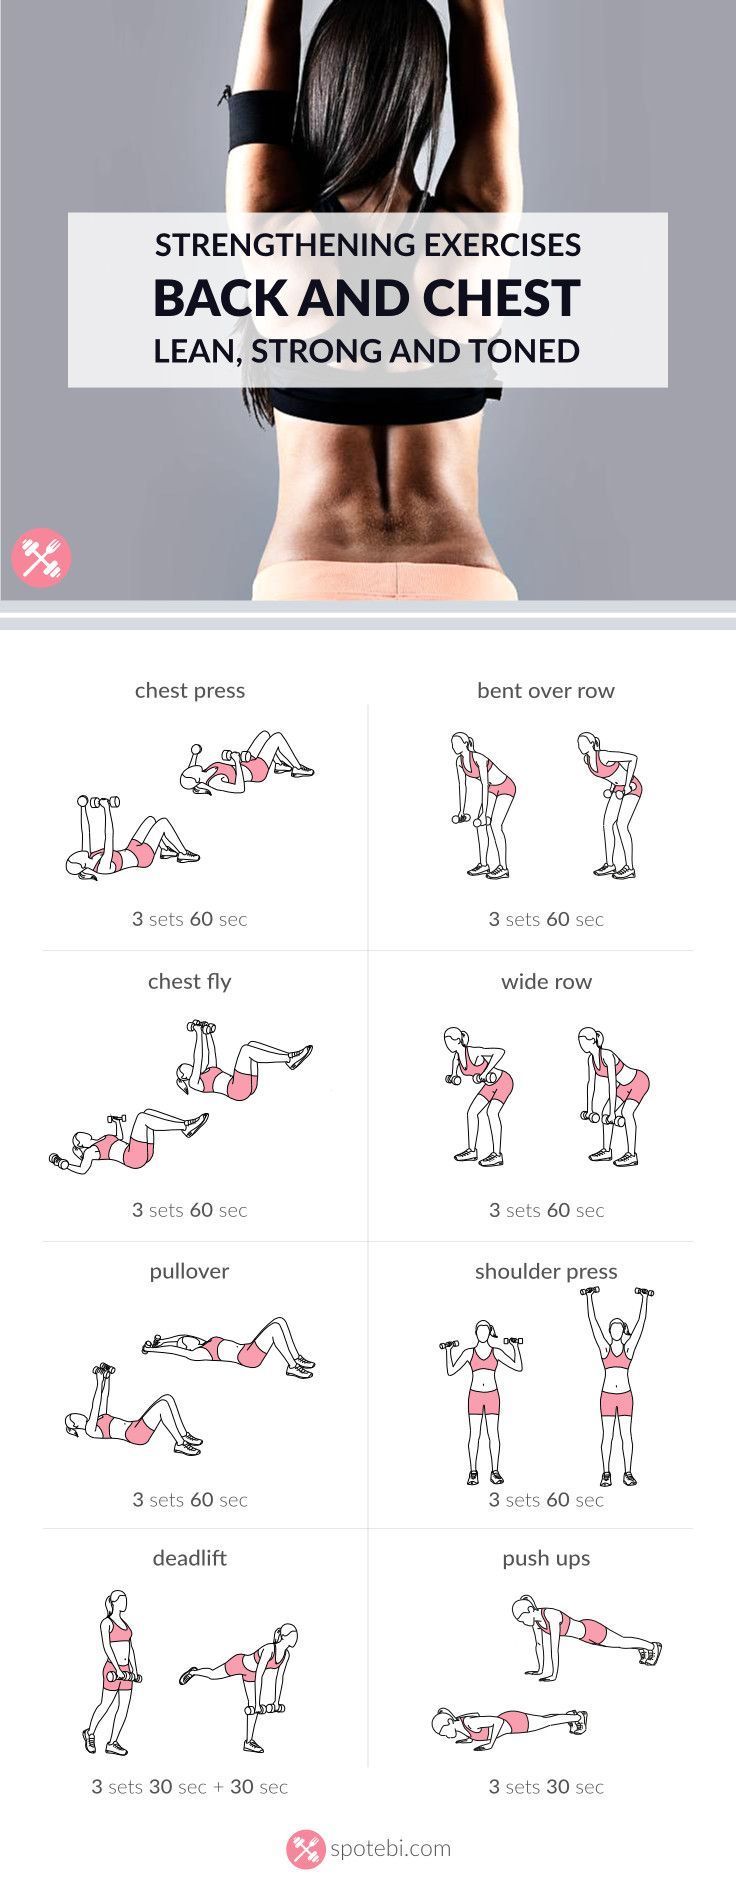 Lift your breasts naturally! Try these chest and back strengthening exercises for